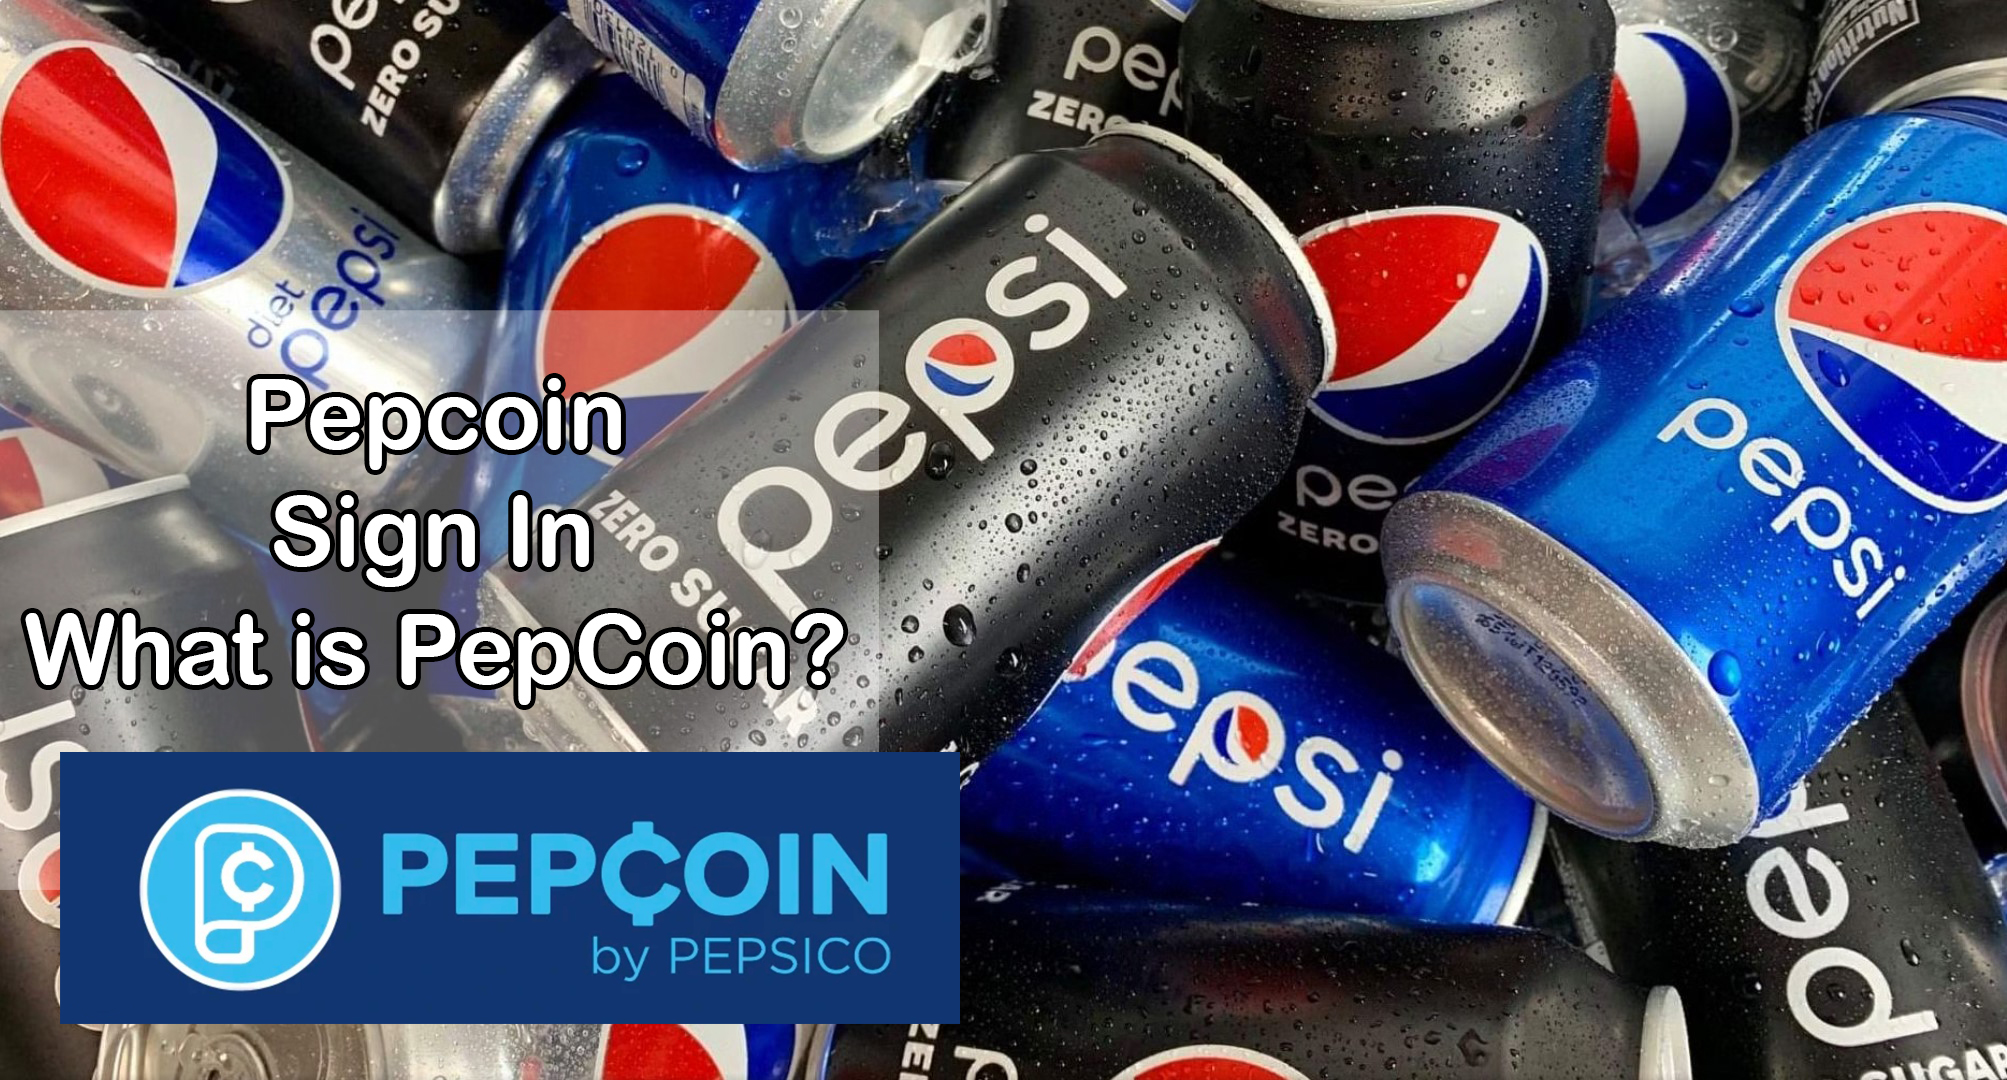 Pepcoin Sign In-What is PepCoin?